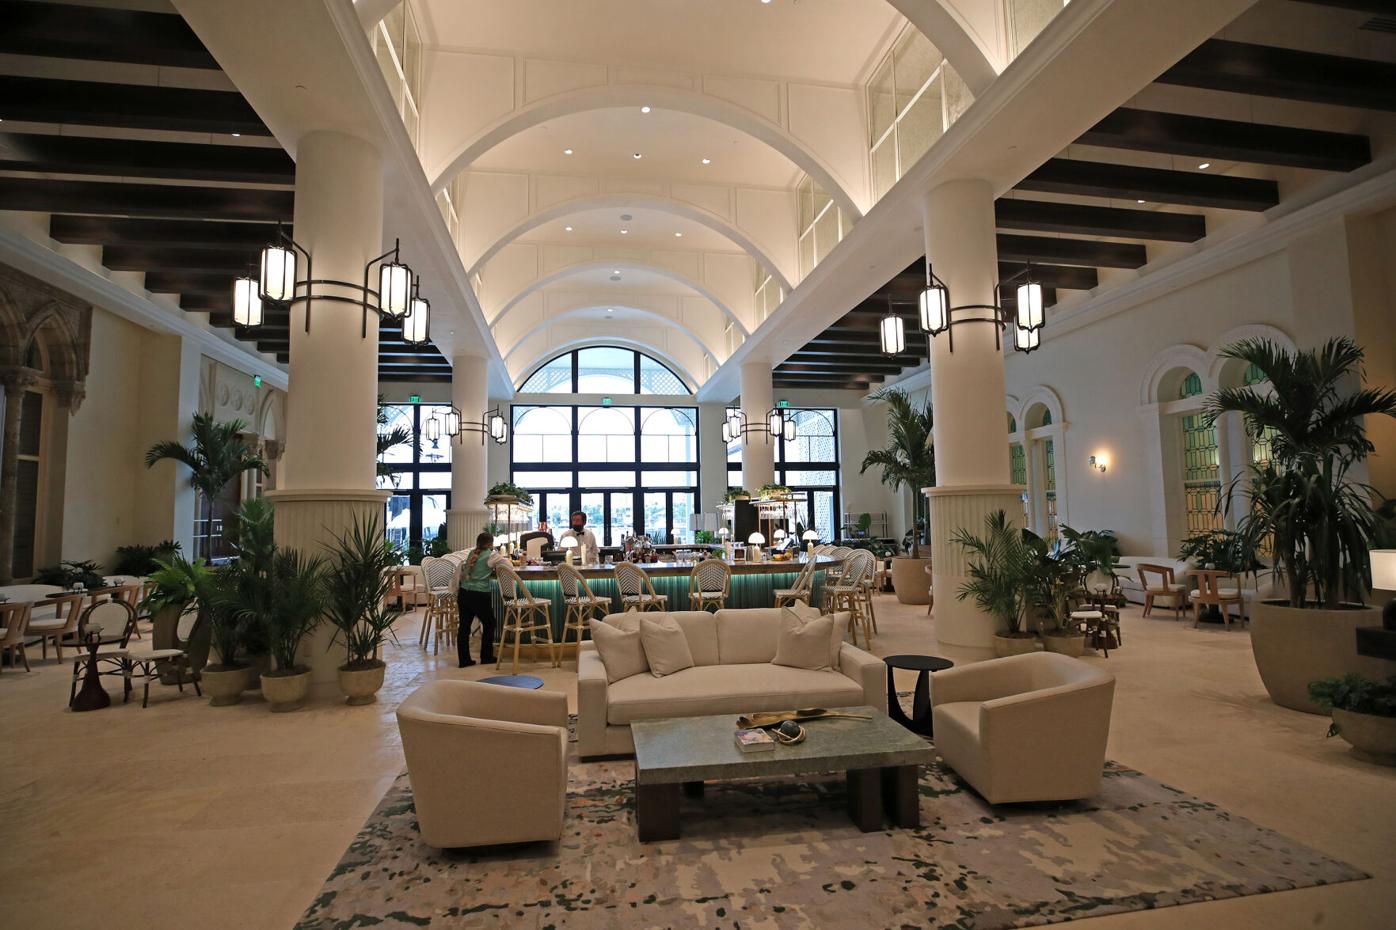 Palm Court at The Boca Raton